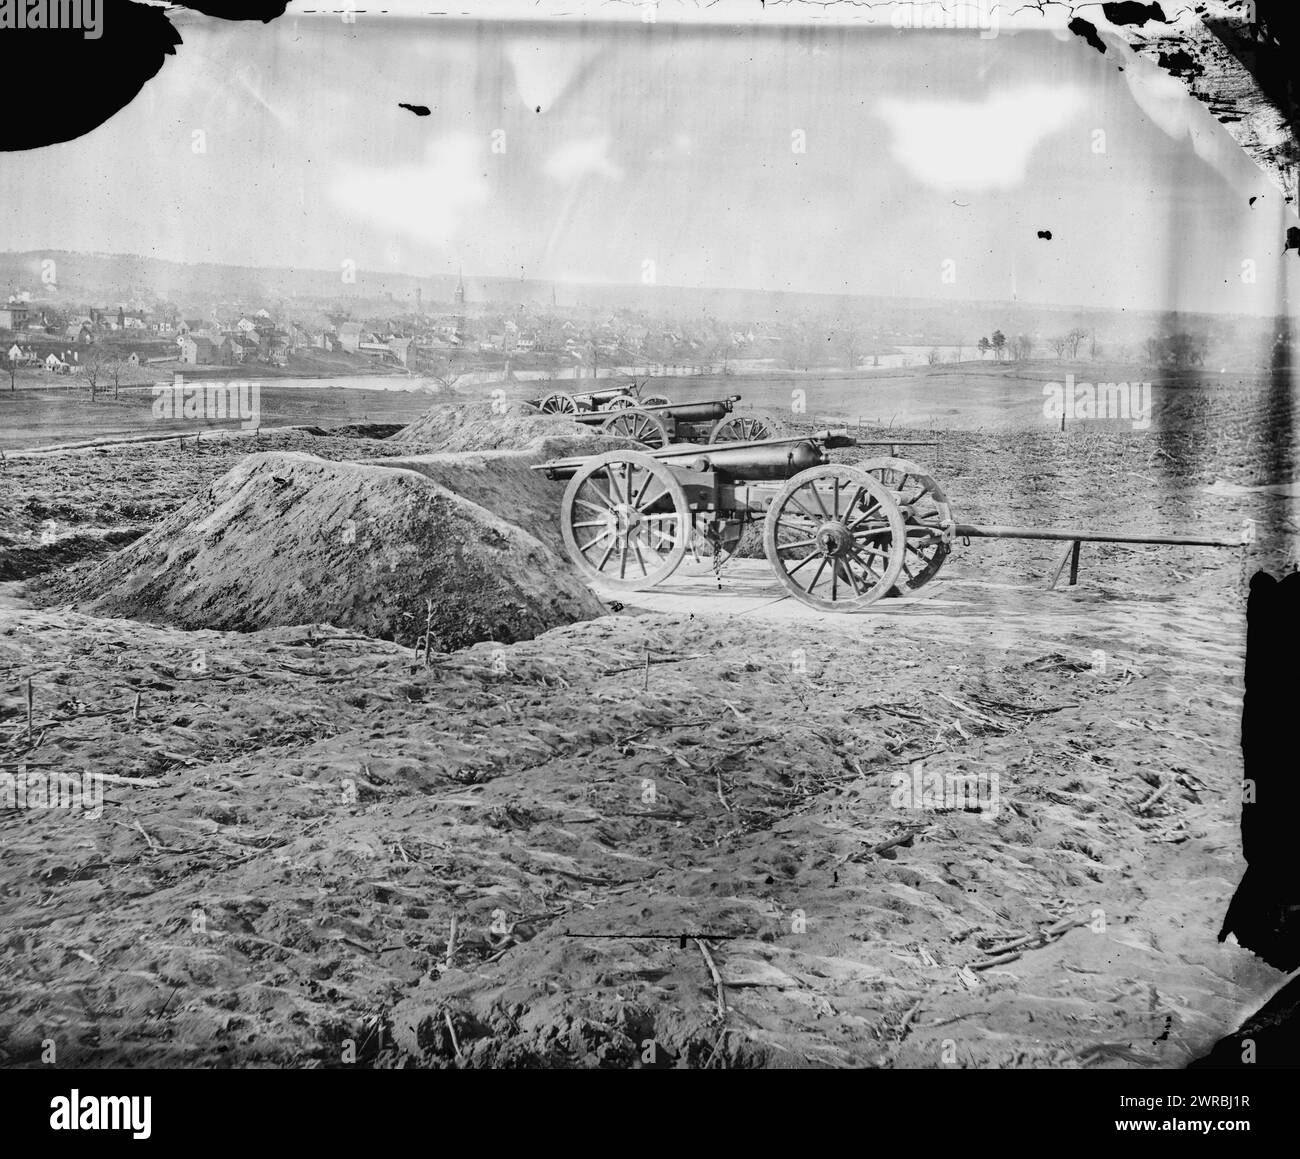 Fredericksburg, Va. View of town from Tyler's Battery, Photograph from the main eastern theater of the war, Burnside and Hooker, November 1862-April 1863., Gibson, James F., 1828-, photographer, between 1860 and 1865, United States, History, Civil War, 1861-1865, Glass negatives, 1860-1870, Stereographs, 1860-1870, 1 negative: glass, stereograph, wet collodion, 4 x 10 in Stock Photo